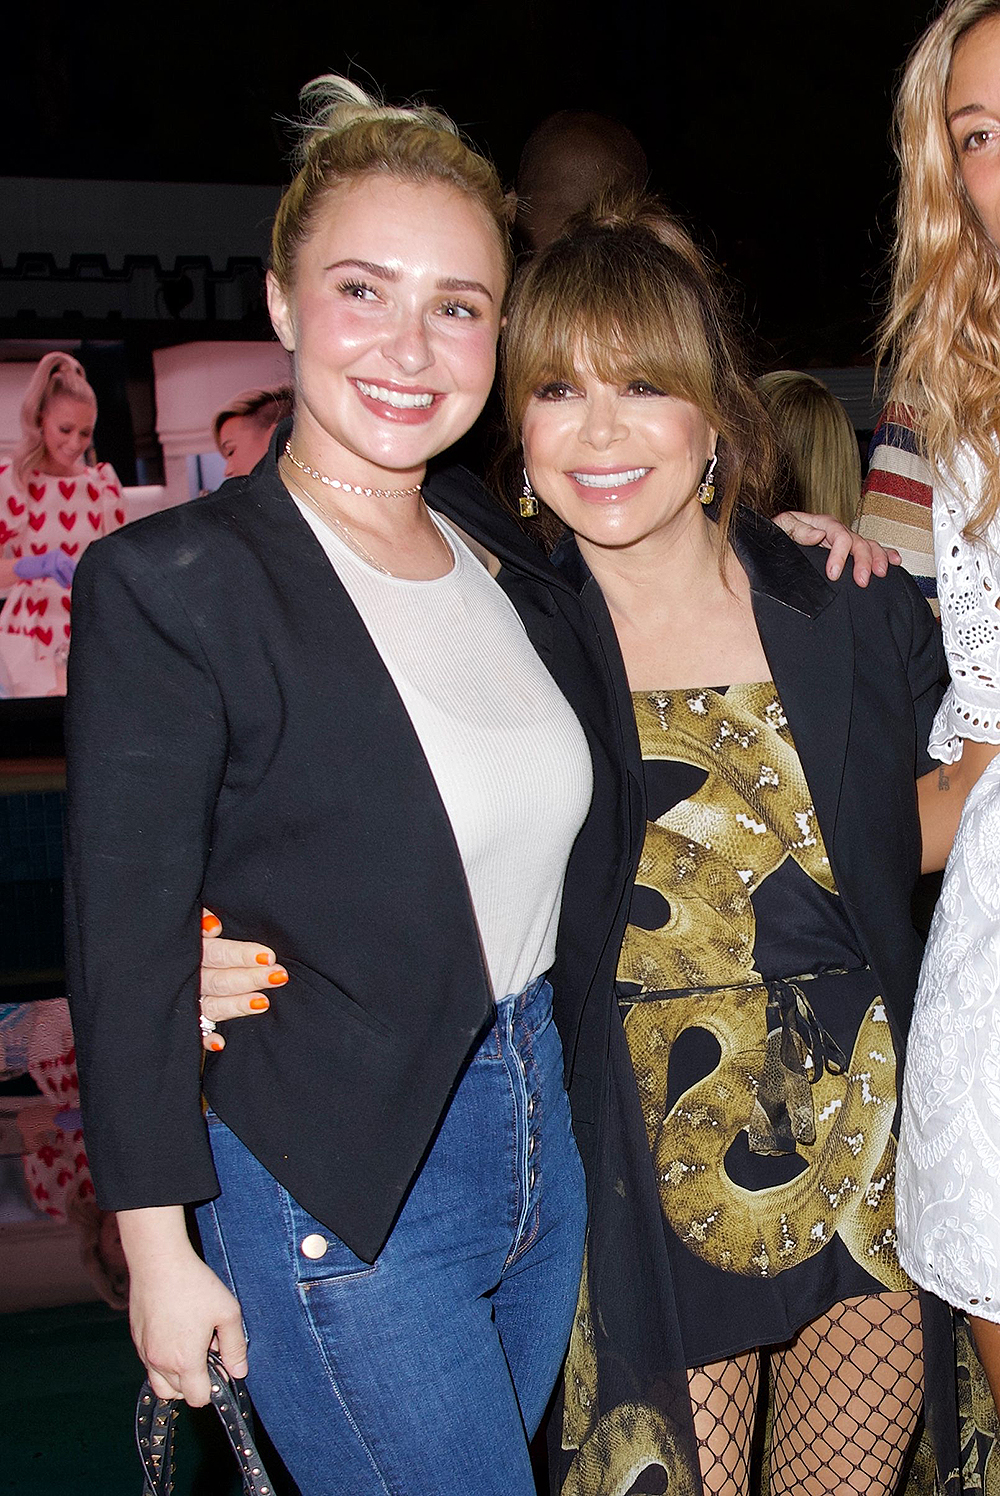 Hayden Panettiere and Paula Abdul attend a special screening of Paris Hiltonâ€™s â€˜Cooking with Parisâ€™ Netflix special